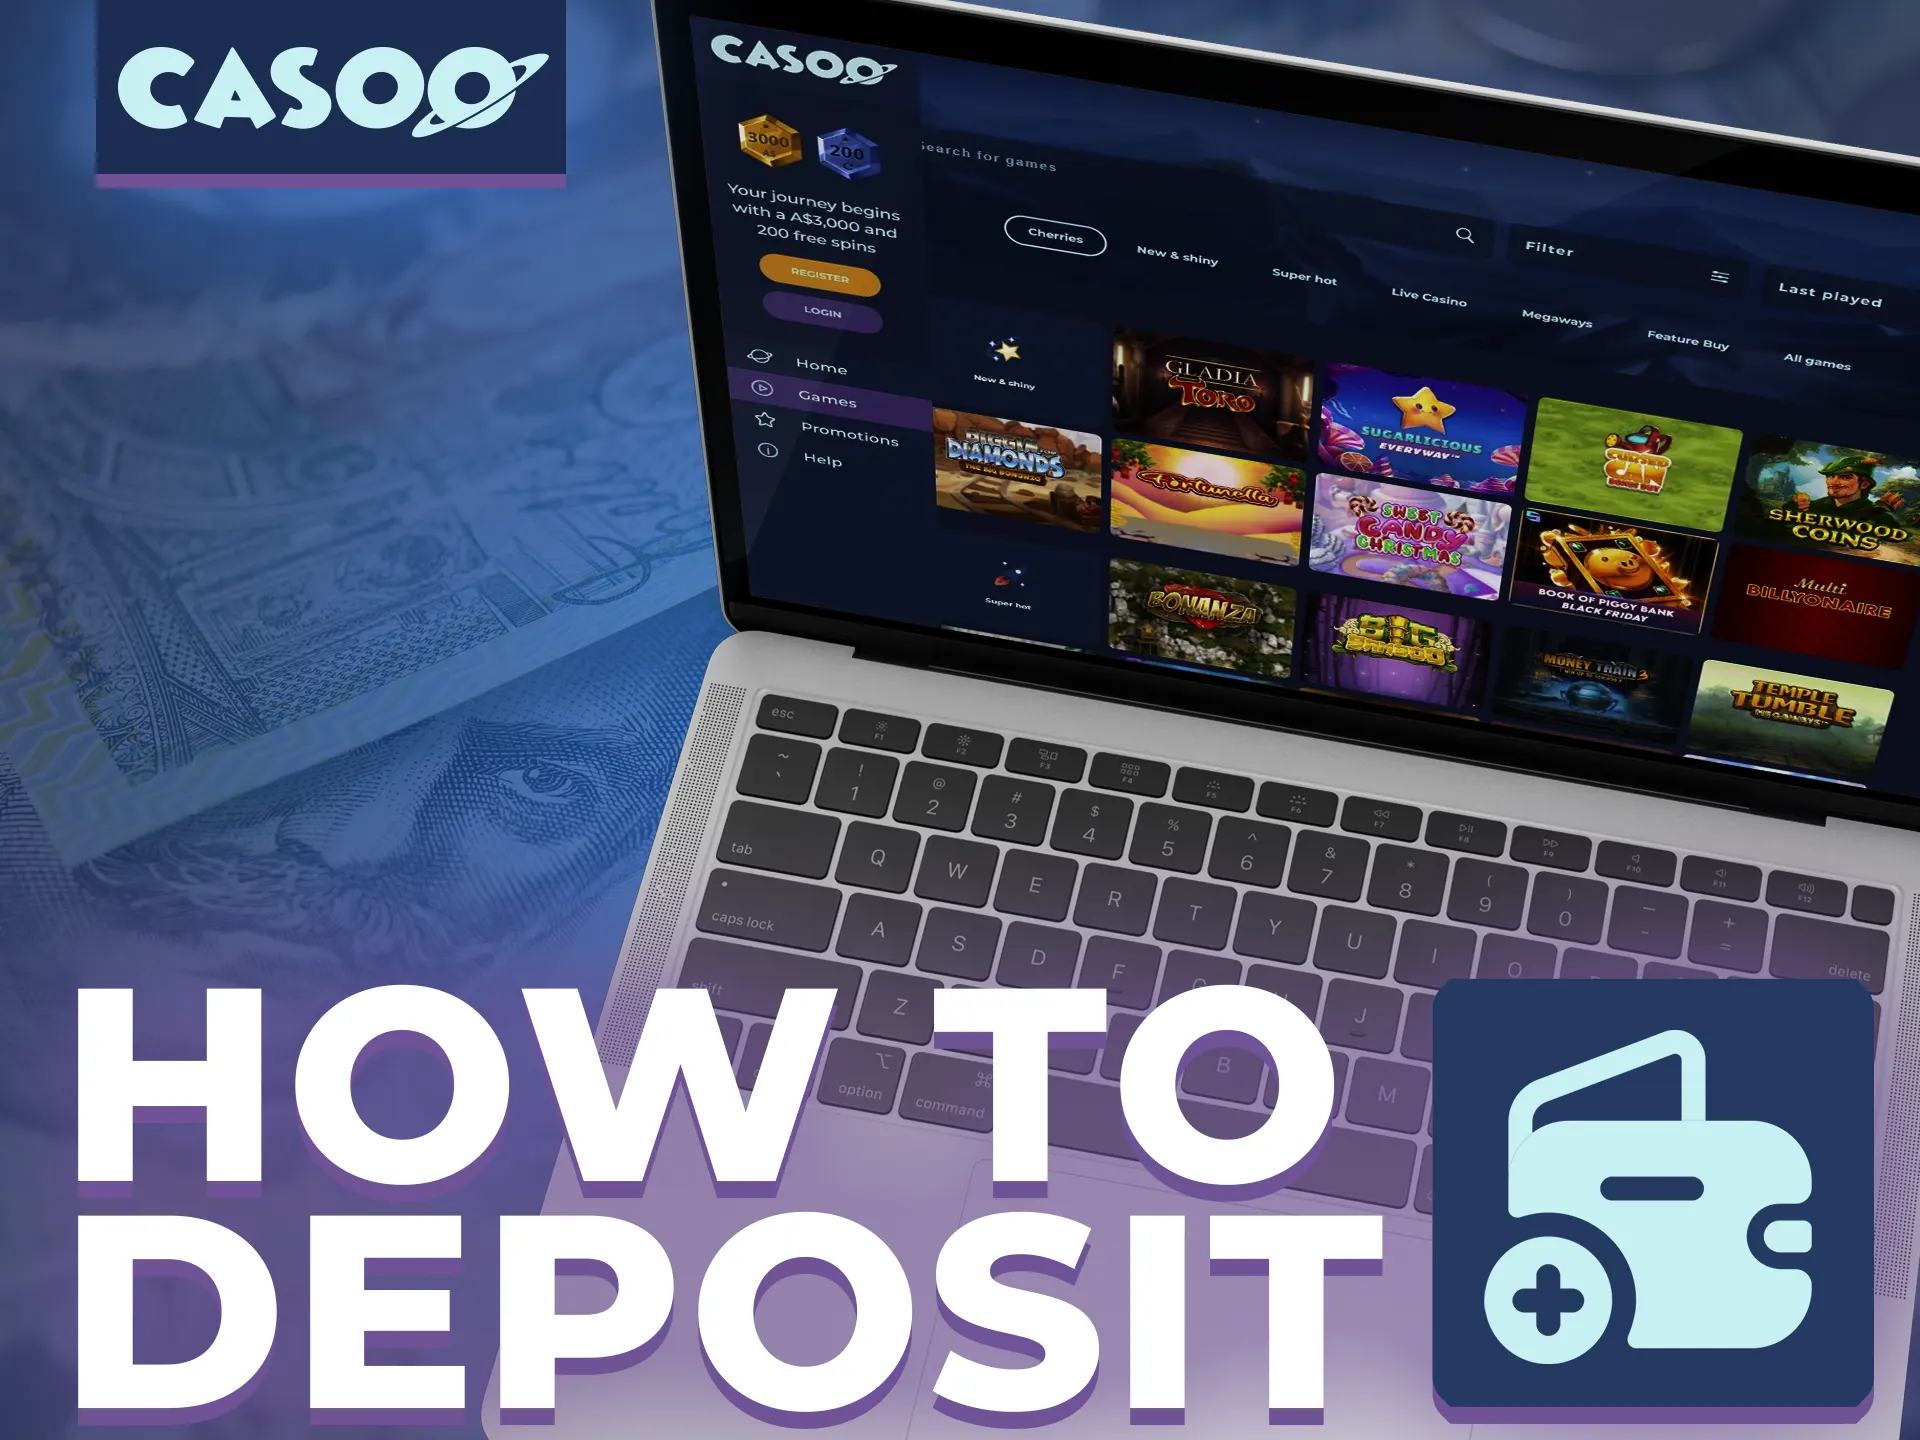 Check how you can deposit money at Casoo.